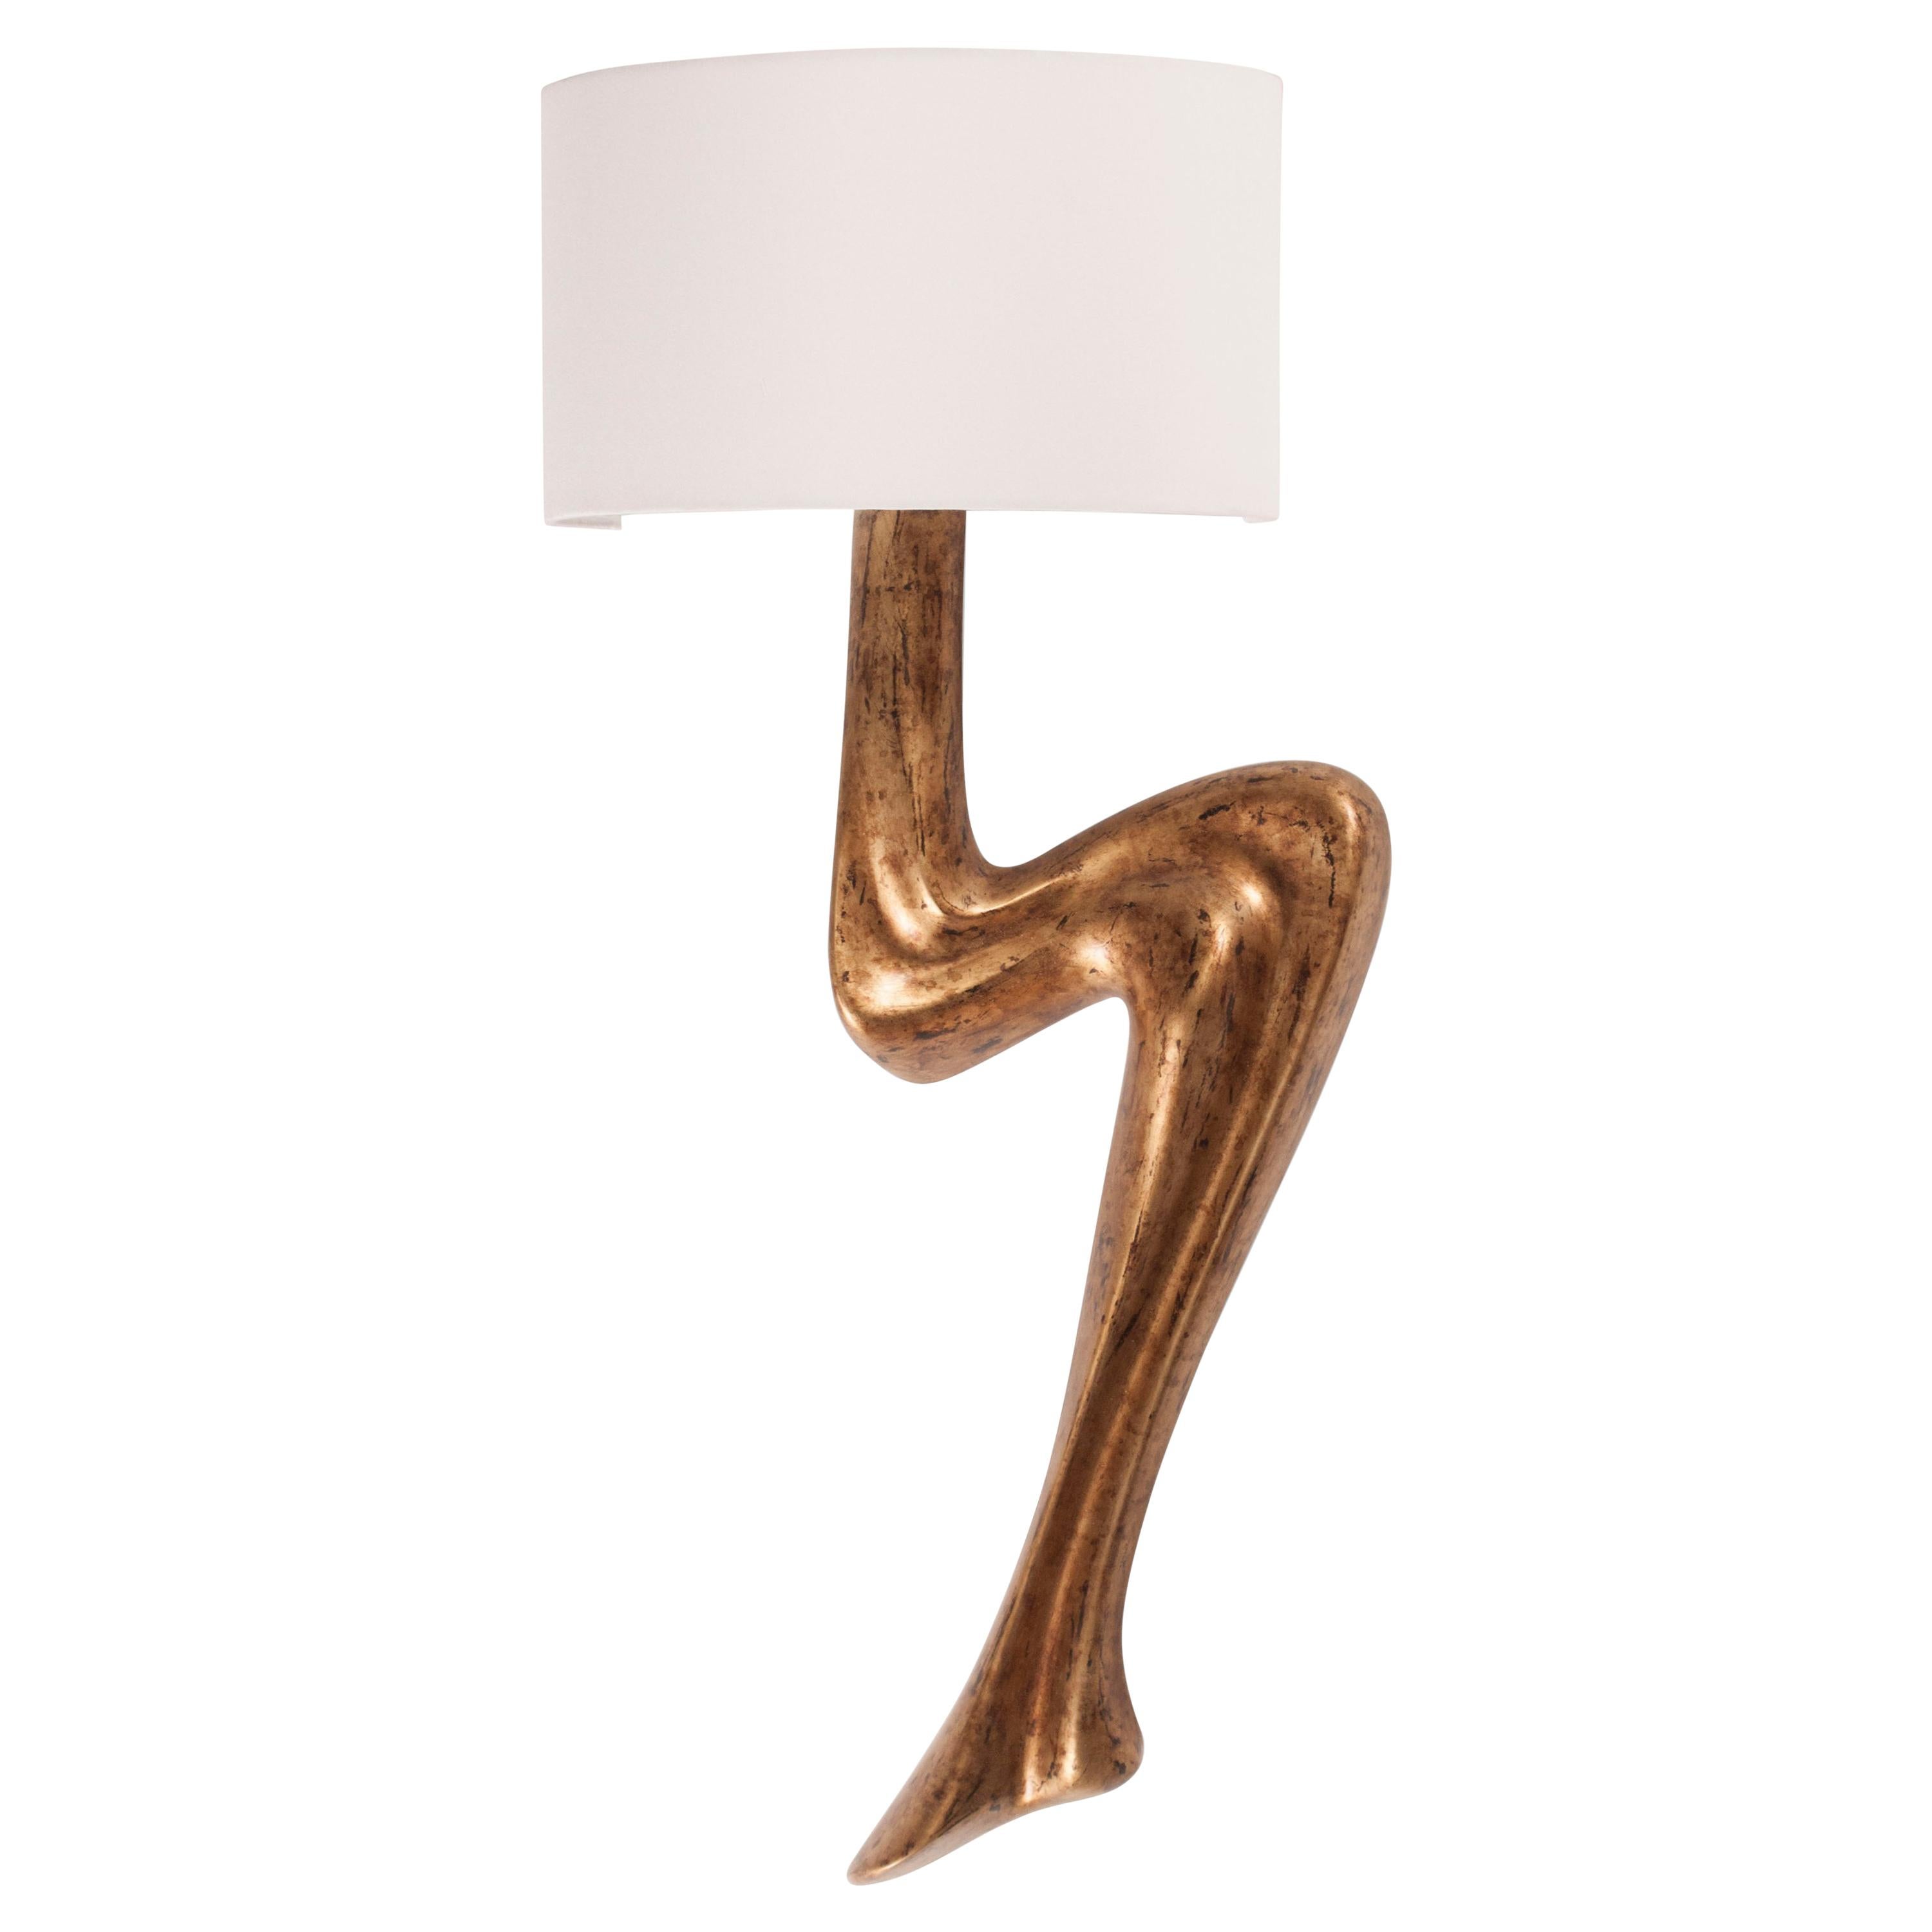 Amorph Emma Sconces Wall Lighting in Rusted Gold Finish with Ivory Silk Shade